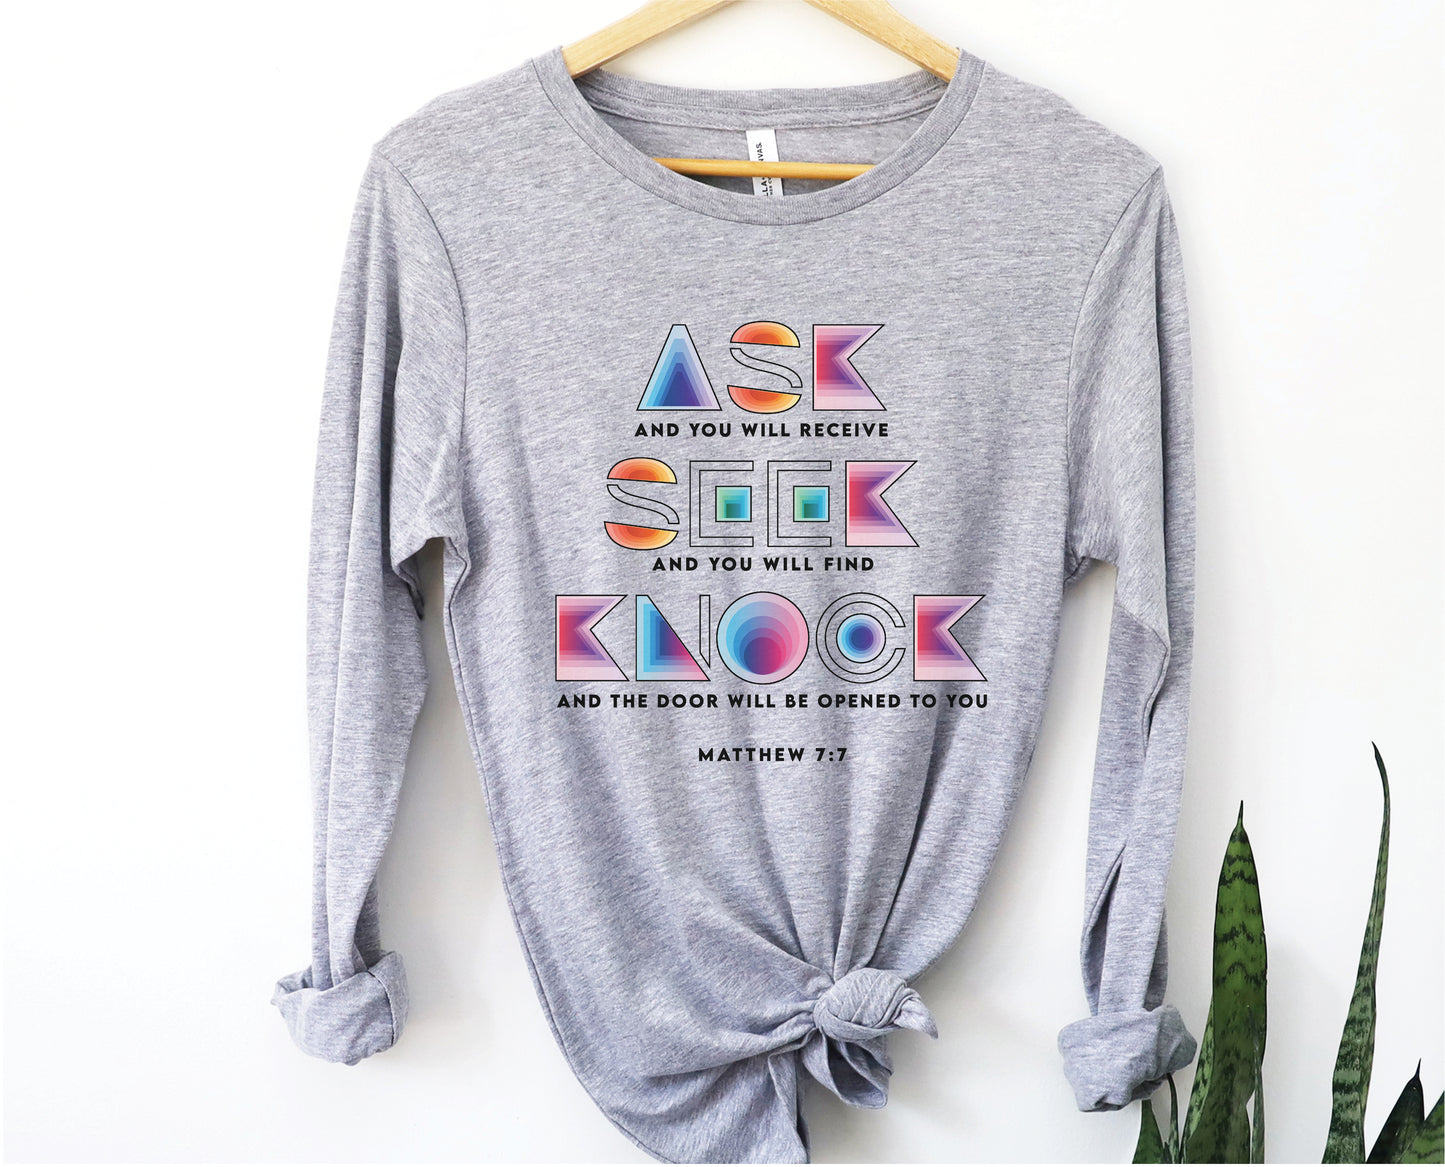 Ask Seek Knock Matthew 7:7 Christian aesthetic design printed in holographic colors on heather gray soft long sleeve tee for men & women